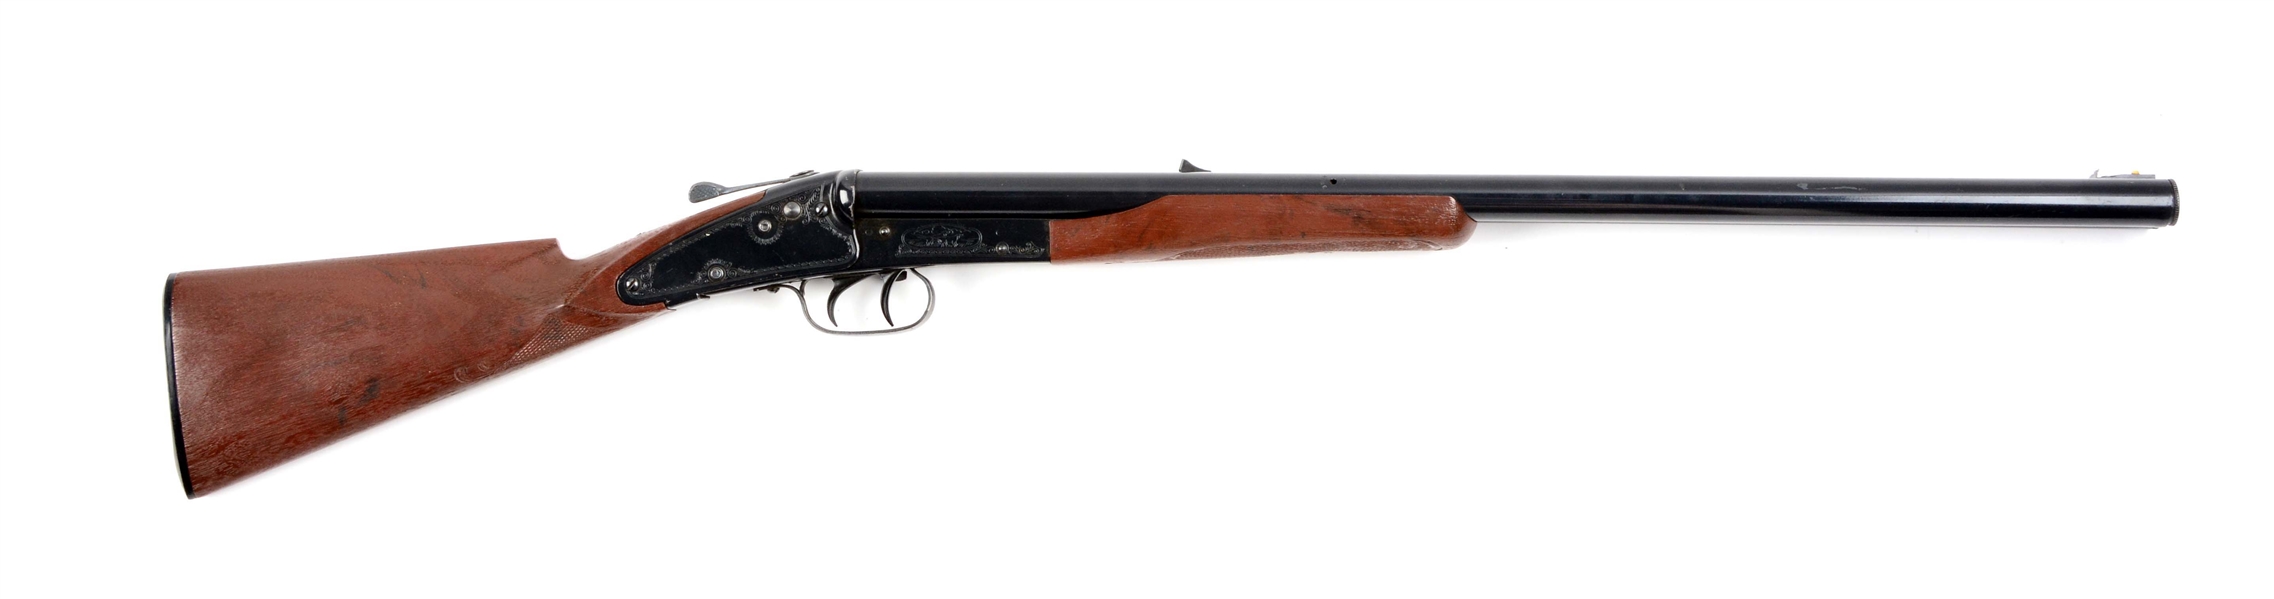 DAISY MODEL 21 SIDE BY SIDE AIR RIFLE.